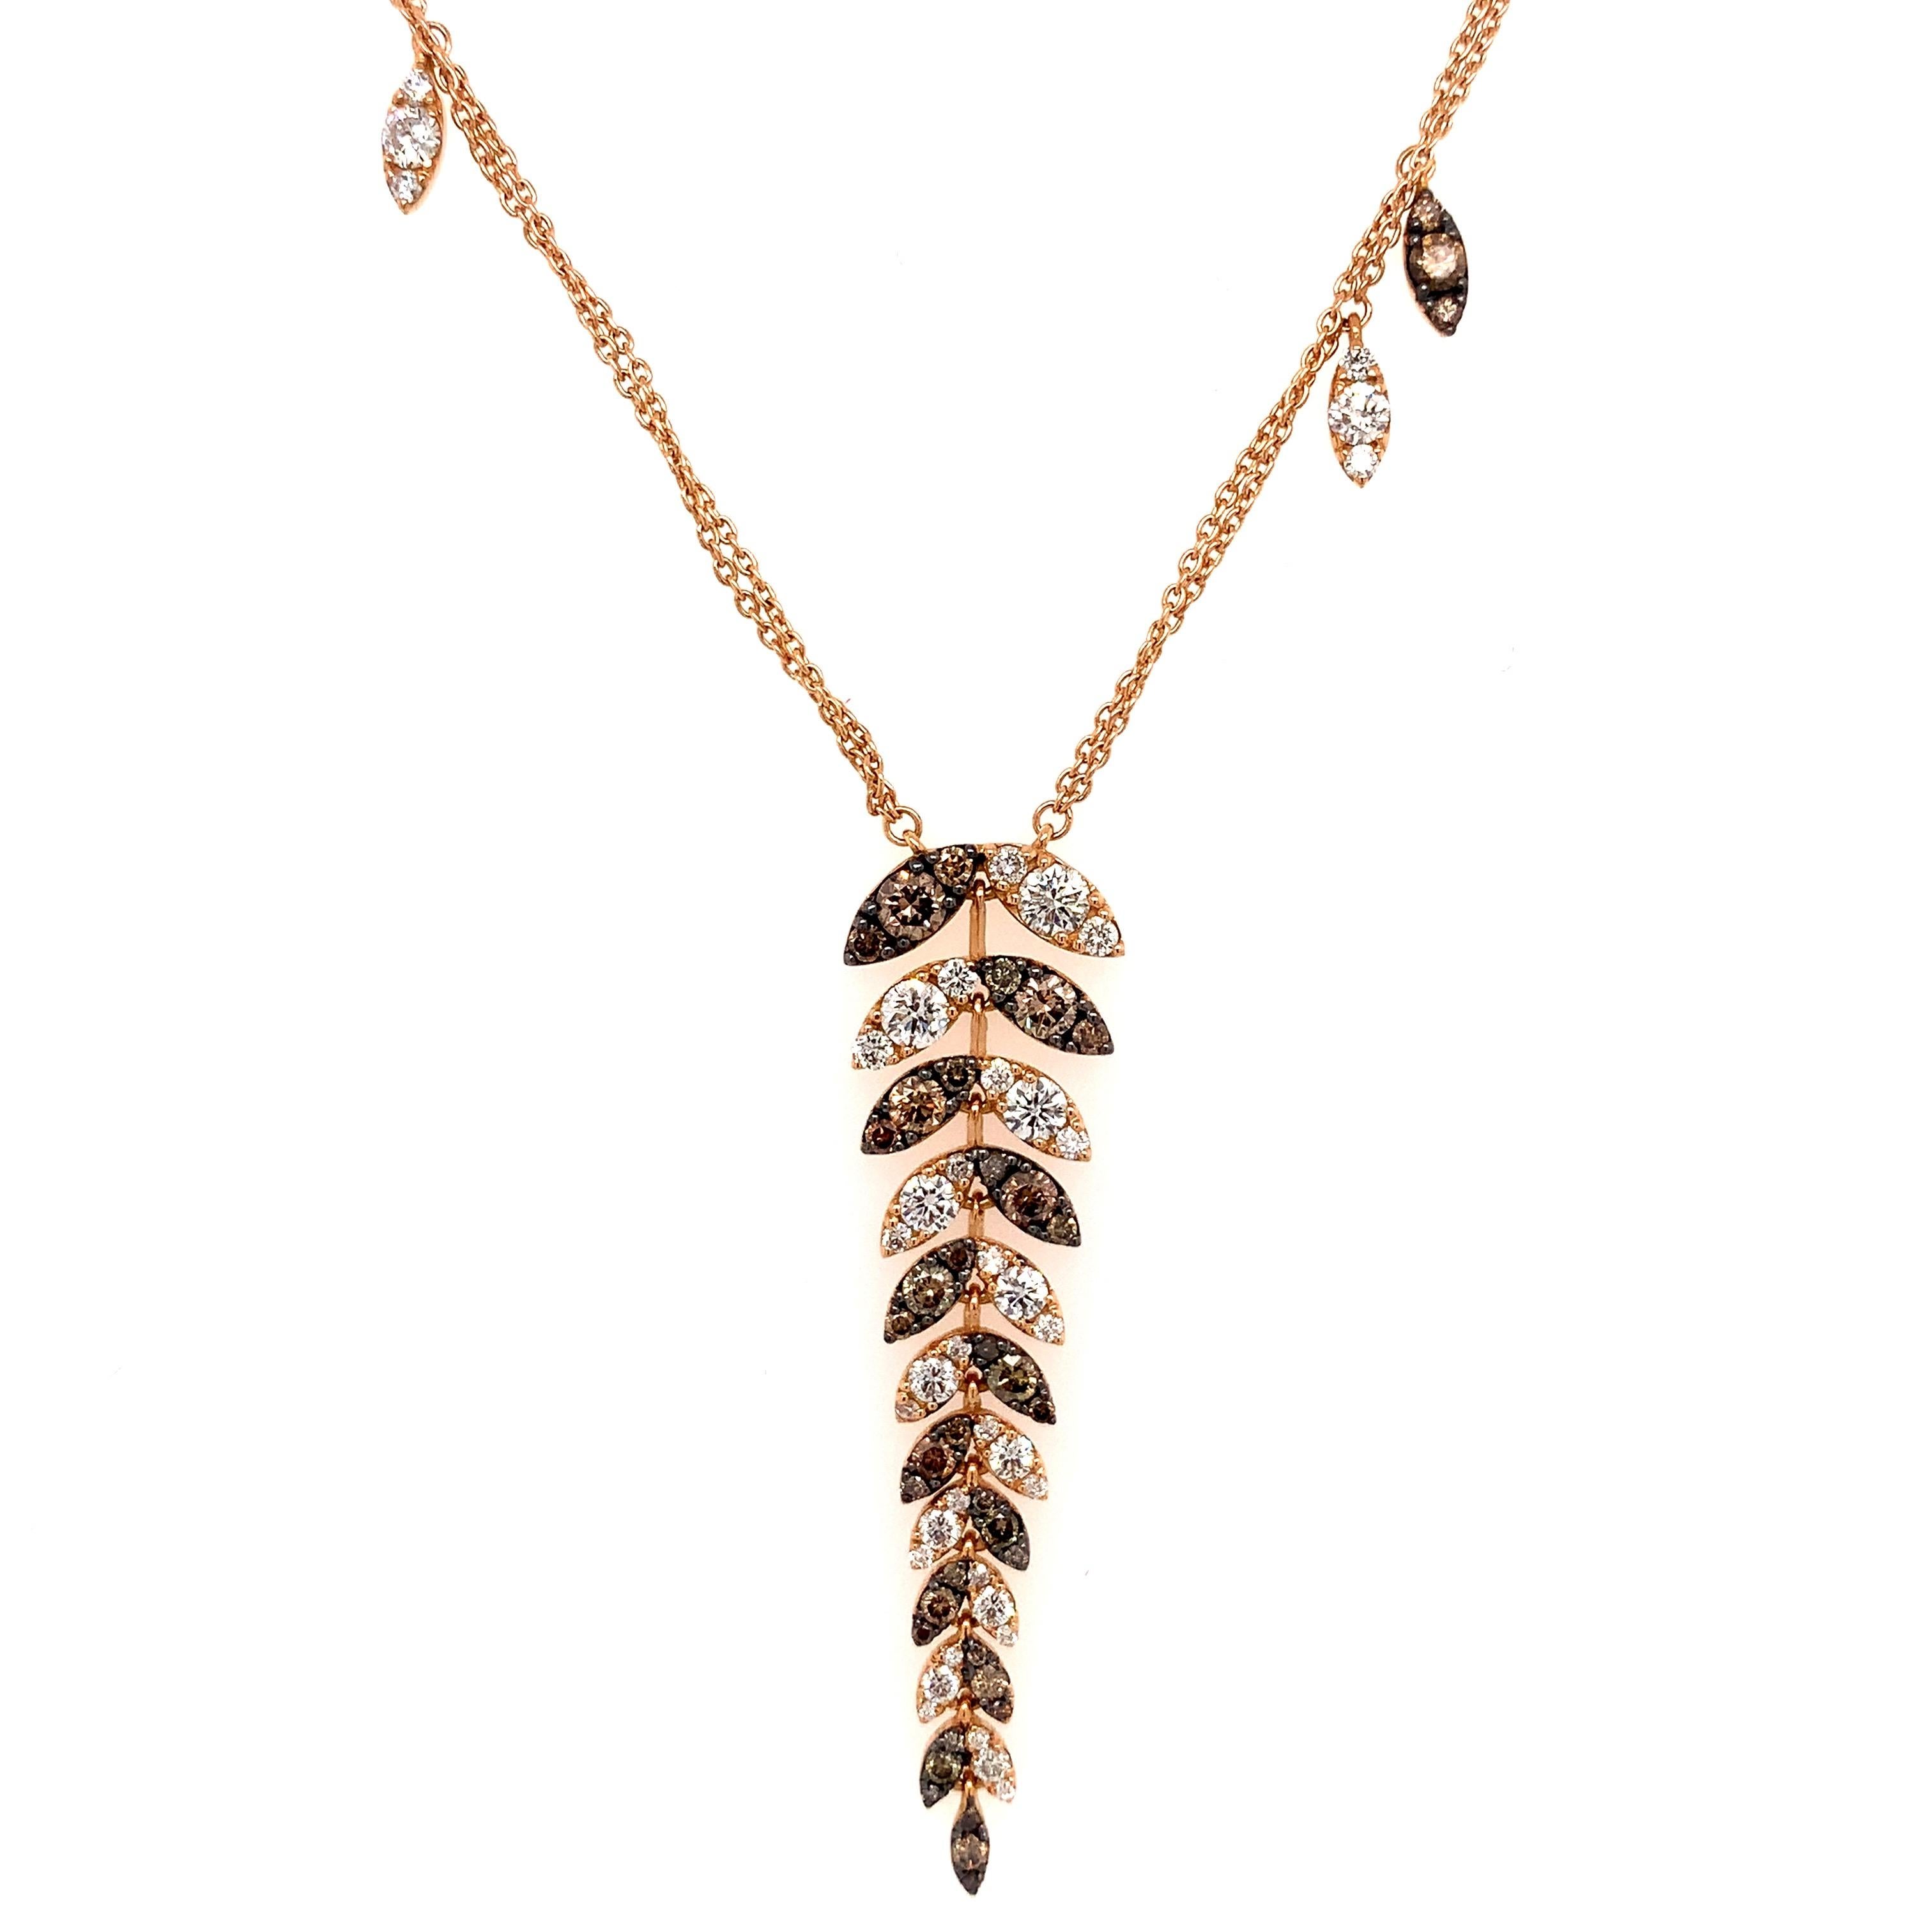 OWN Your Story 18K Rose Gold Cognac and White Diamond Delicate Fern Double Chain Necklace

OWN Your Story brings its 3 generations of family tradition and unparalleled experience with 18K gold, diamonds, and gemstones to create high-level jewelry